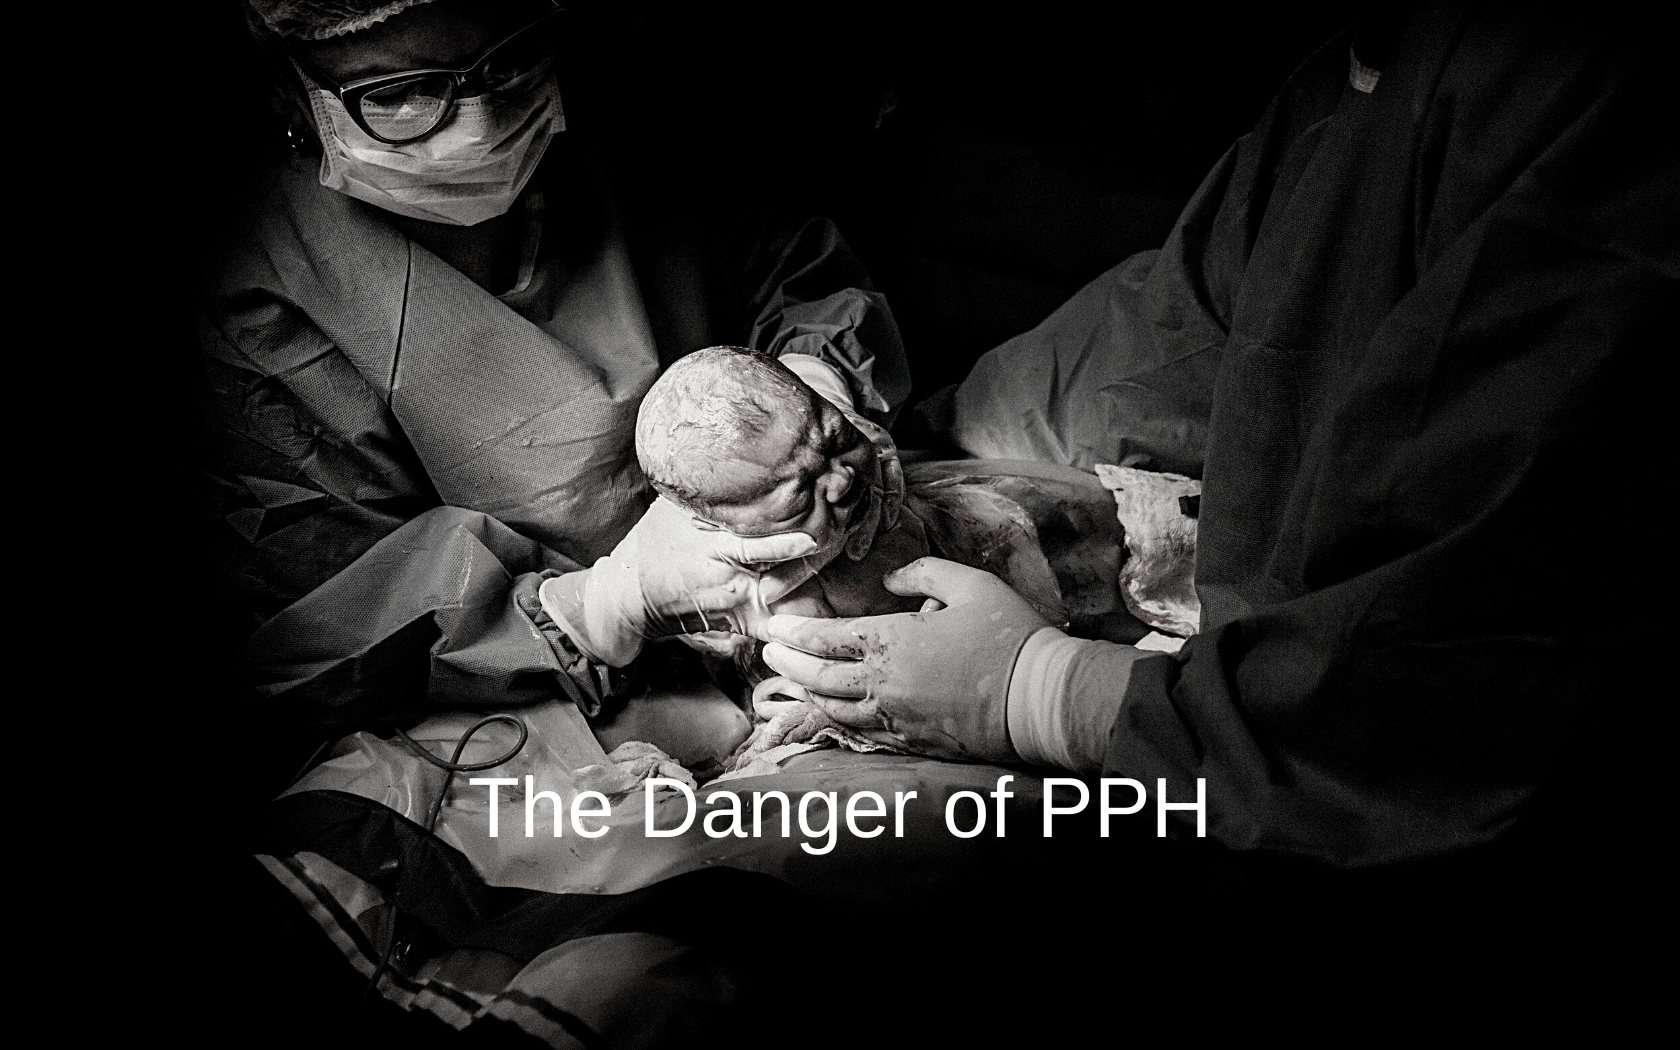 PPH can occur after a C-section as well as vaginal delivery.